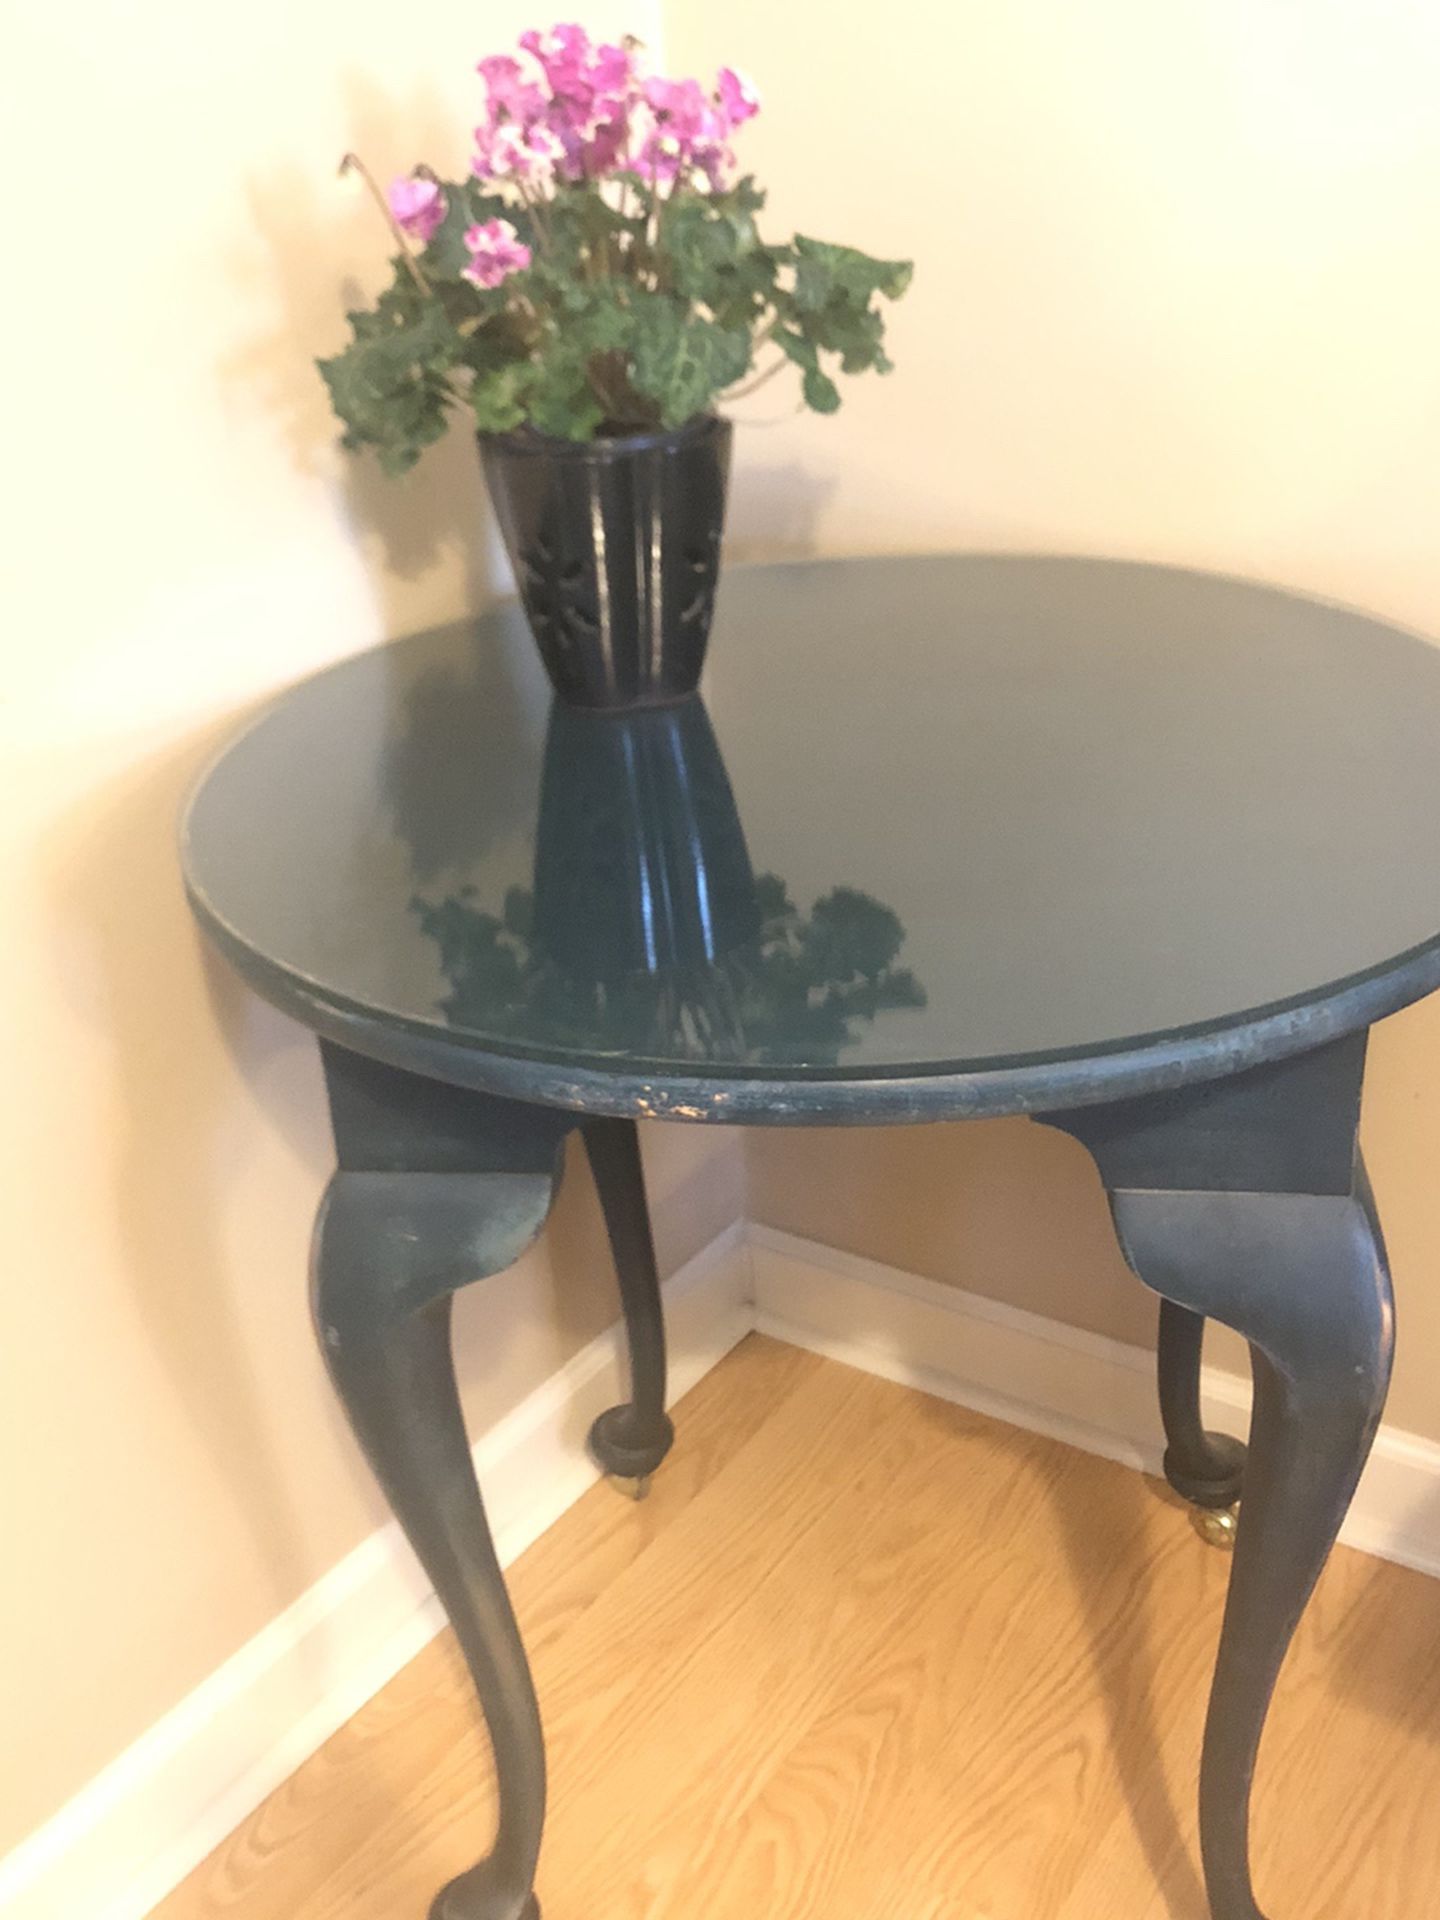 Round Rolling Vintage Table